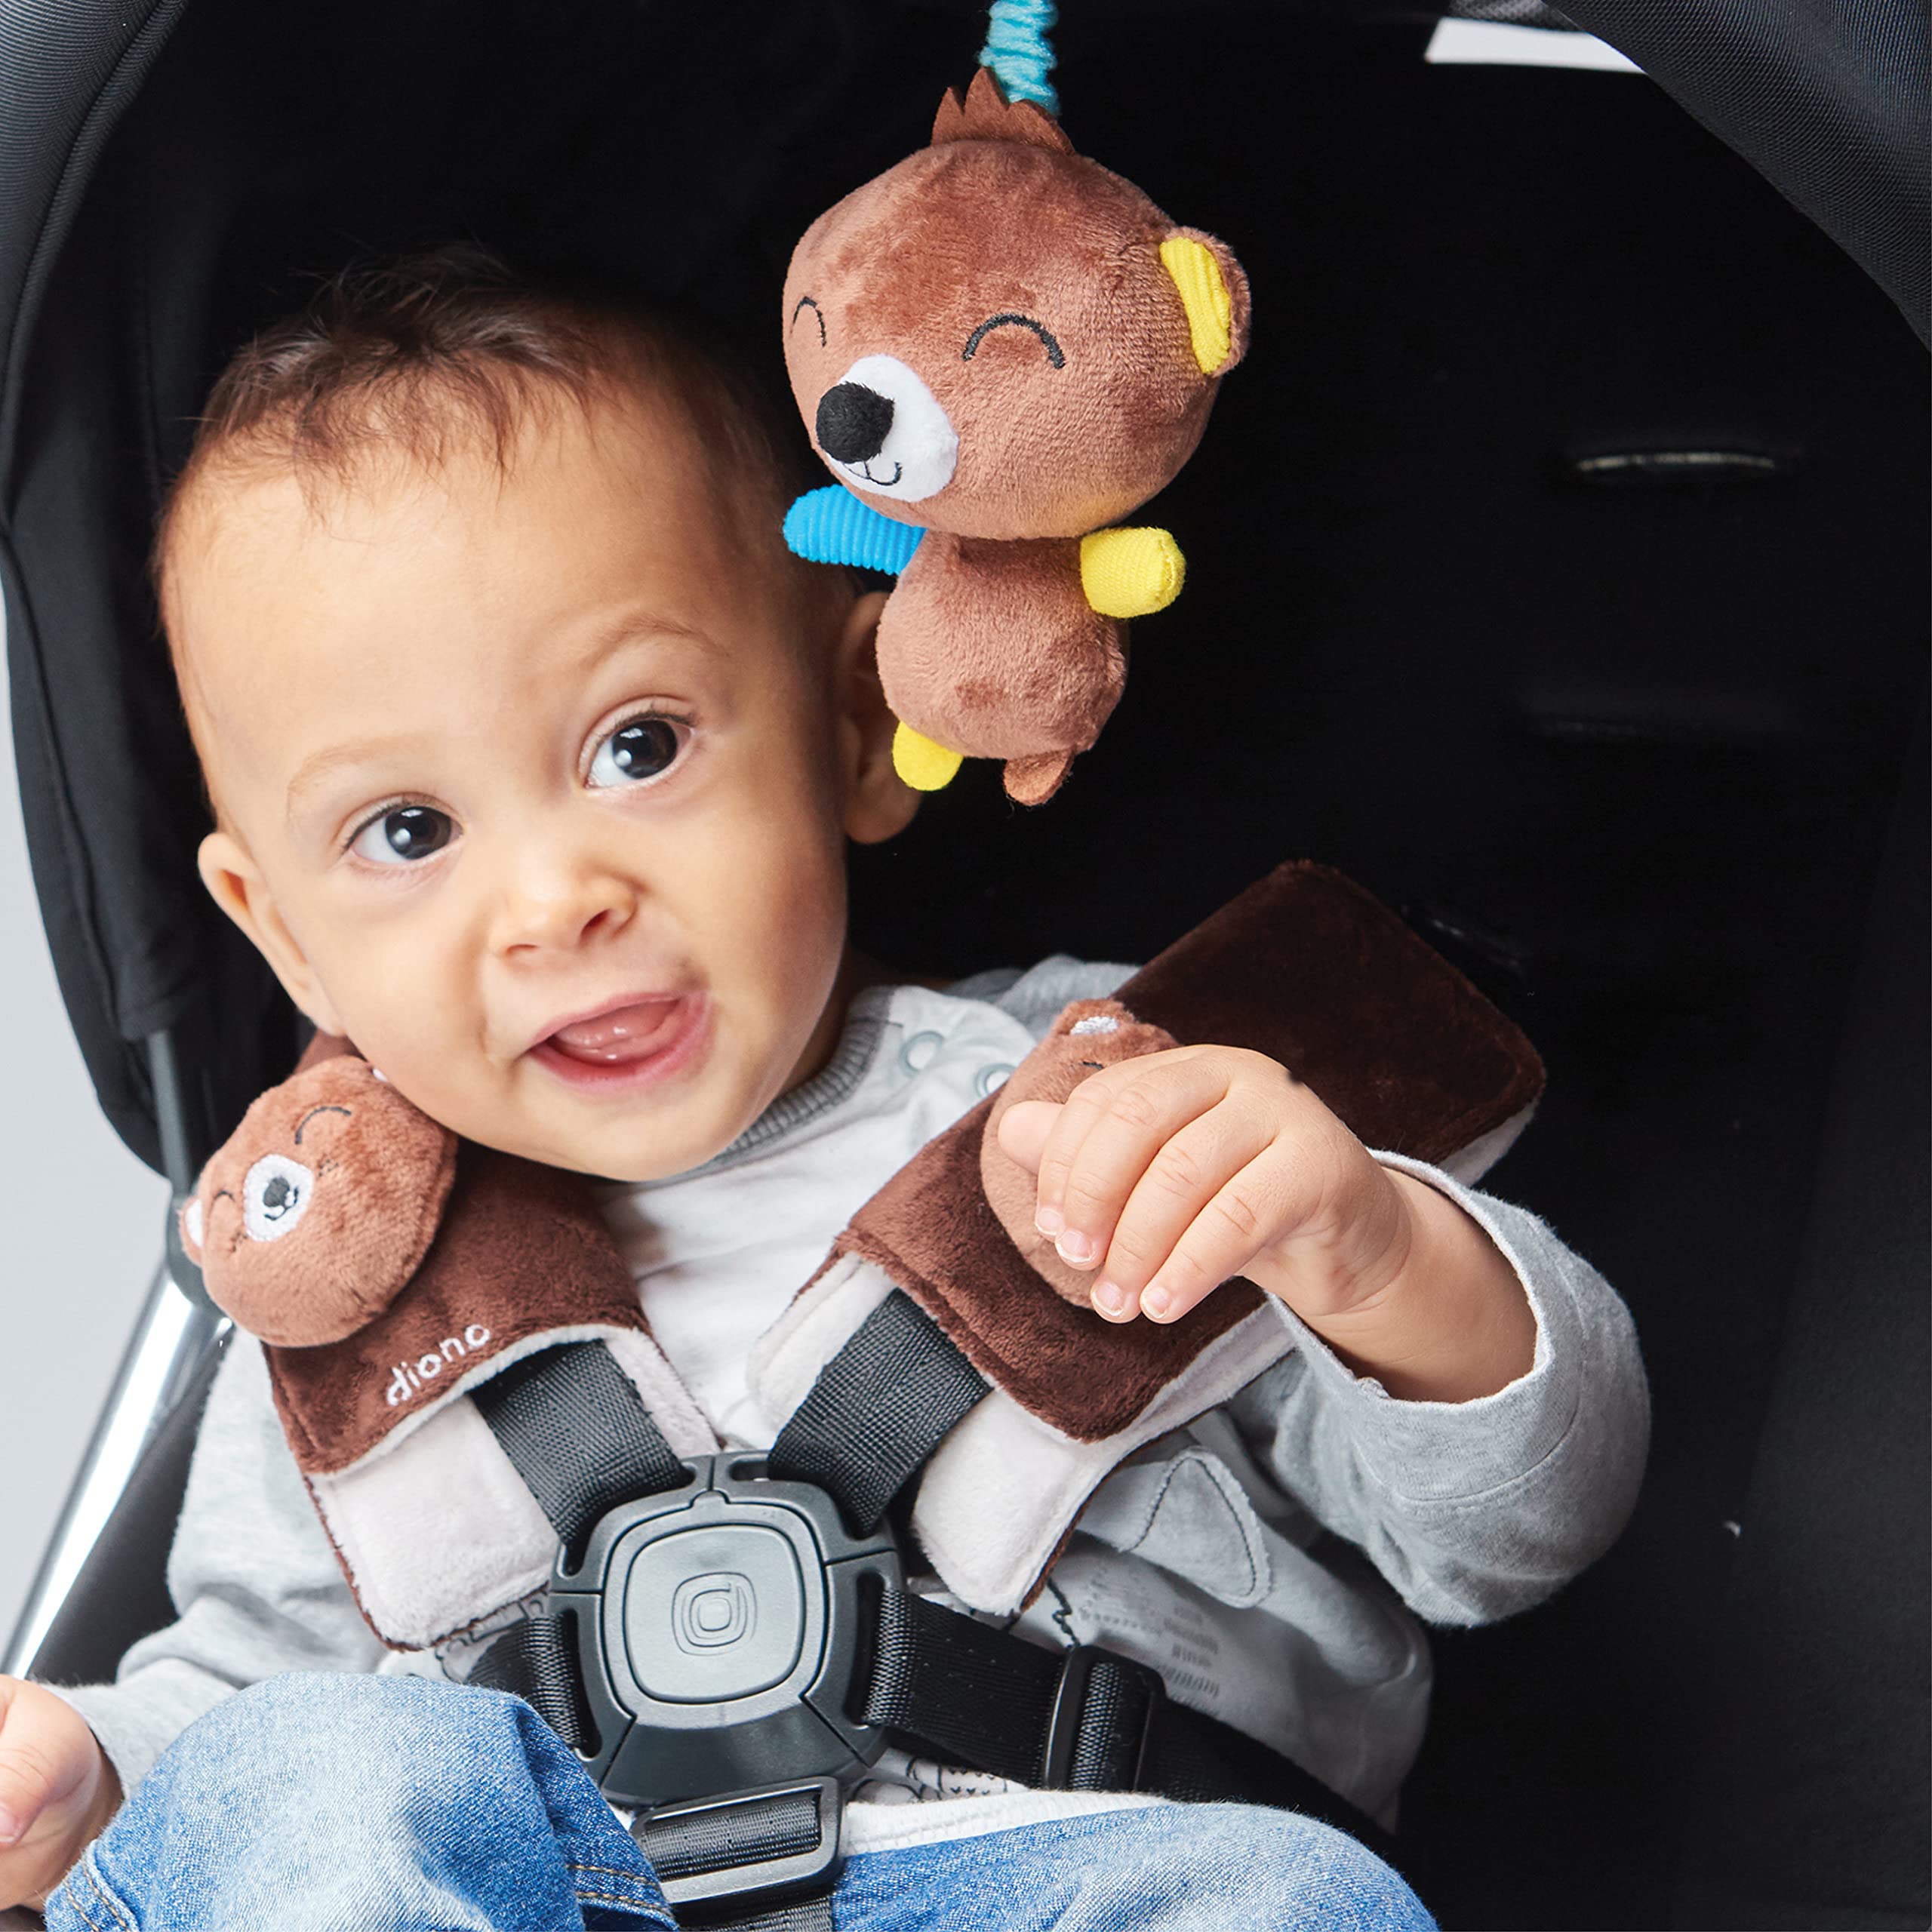 Diono Baby Bear Character Car Seat Straps & Toy, Shoulder Pads for Baby, Infant, Toddler, 2 Pack Soft Seat Belt Cushion and Stroller Harness Covers Helps Prevent Strap Irritation